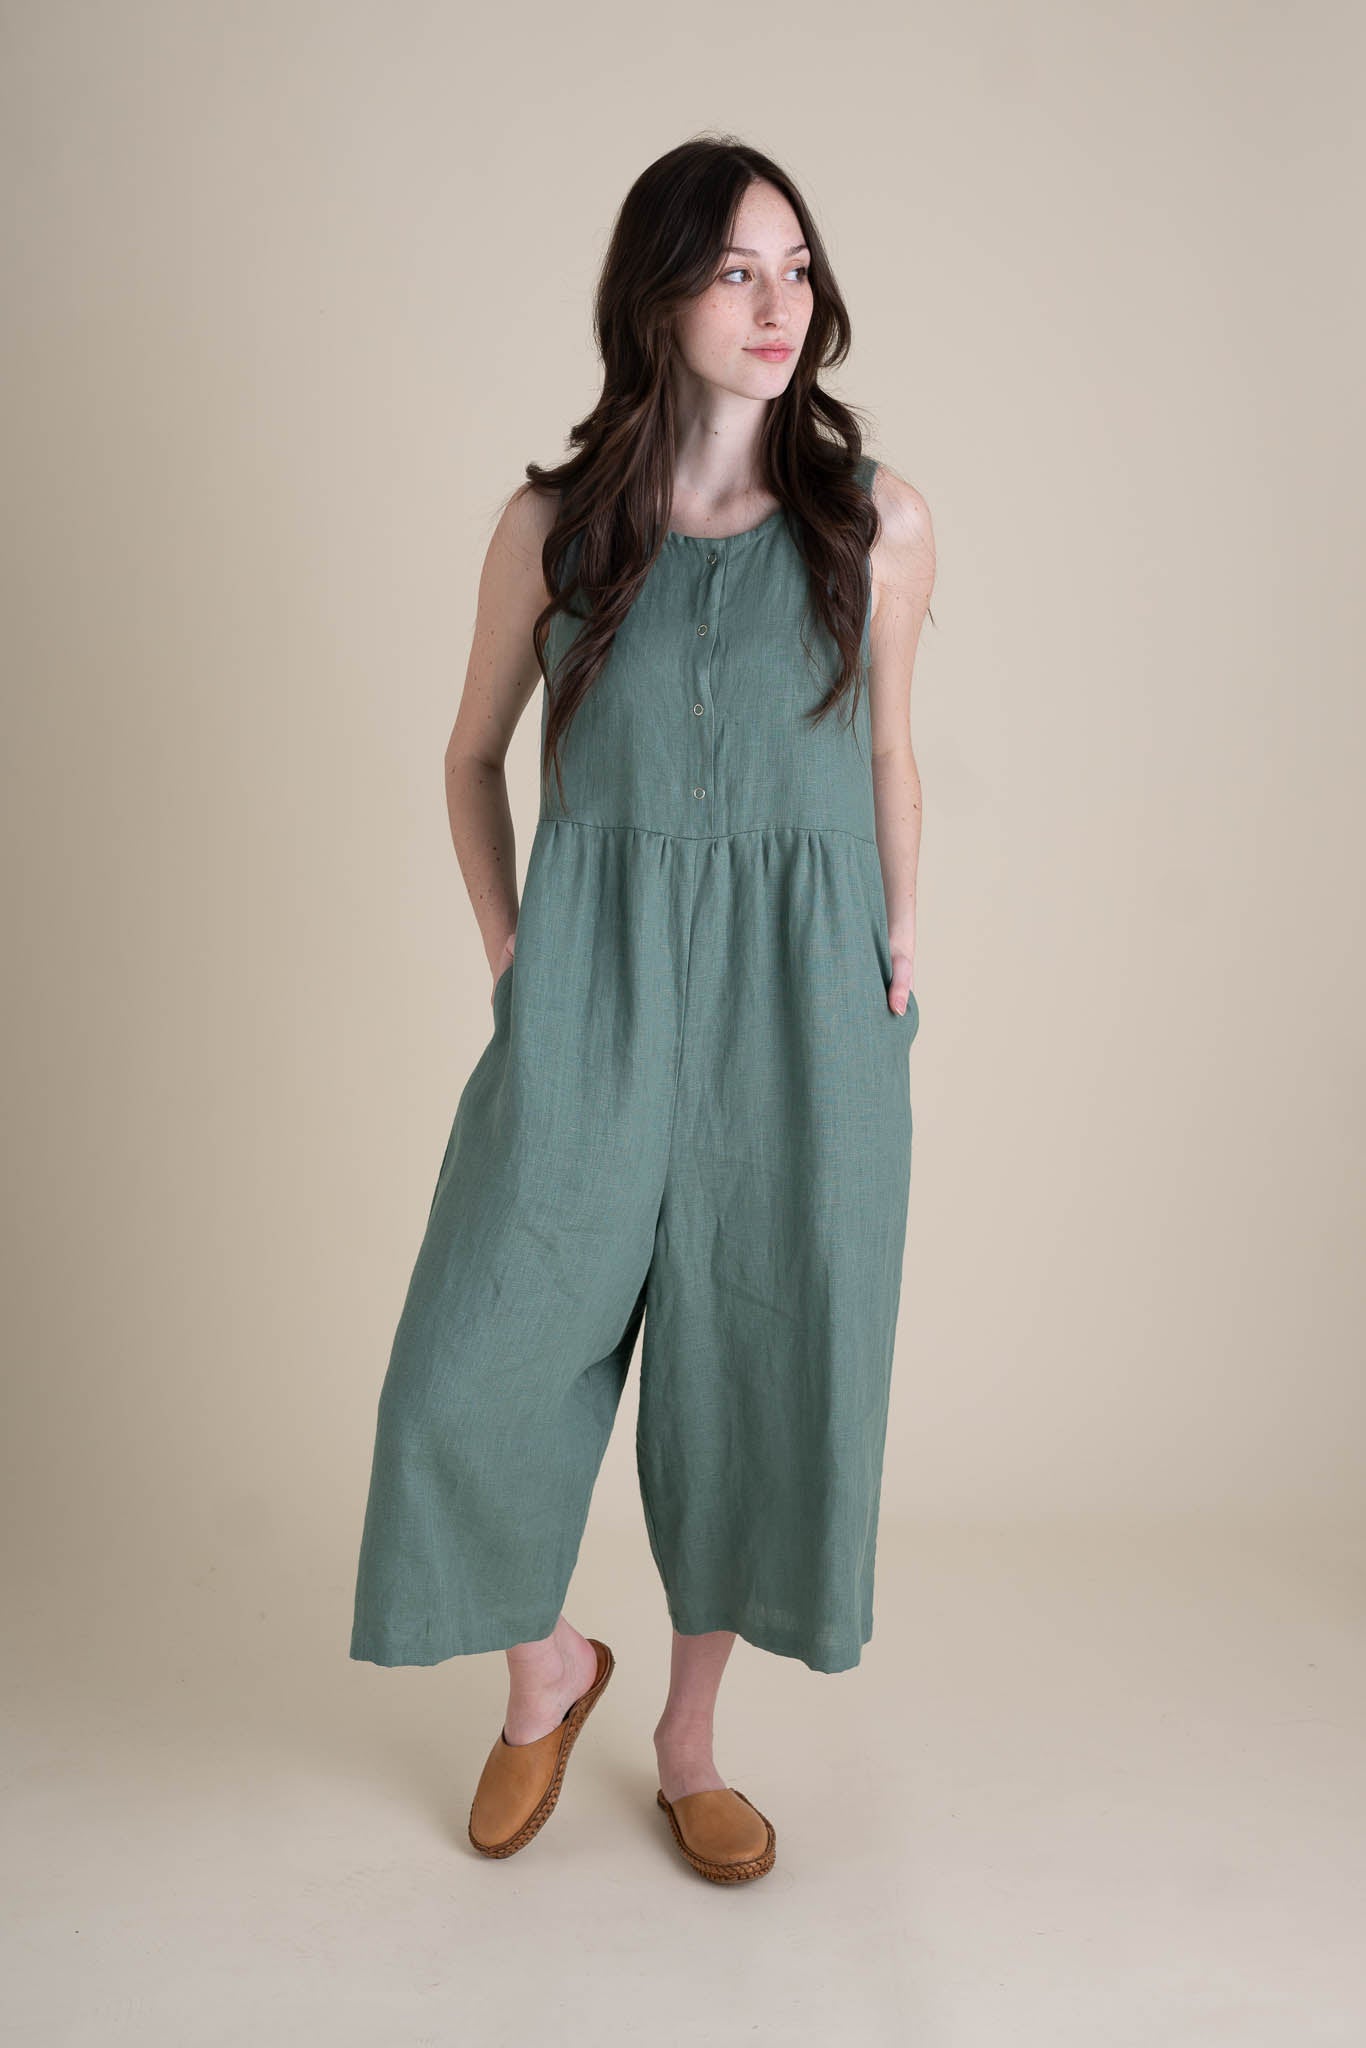 Backyard Jumpsuit in Agave – Conscious Clothing